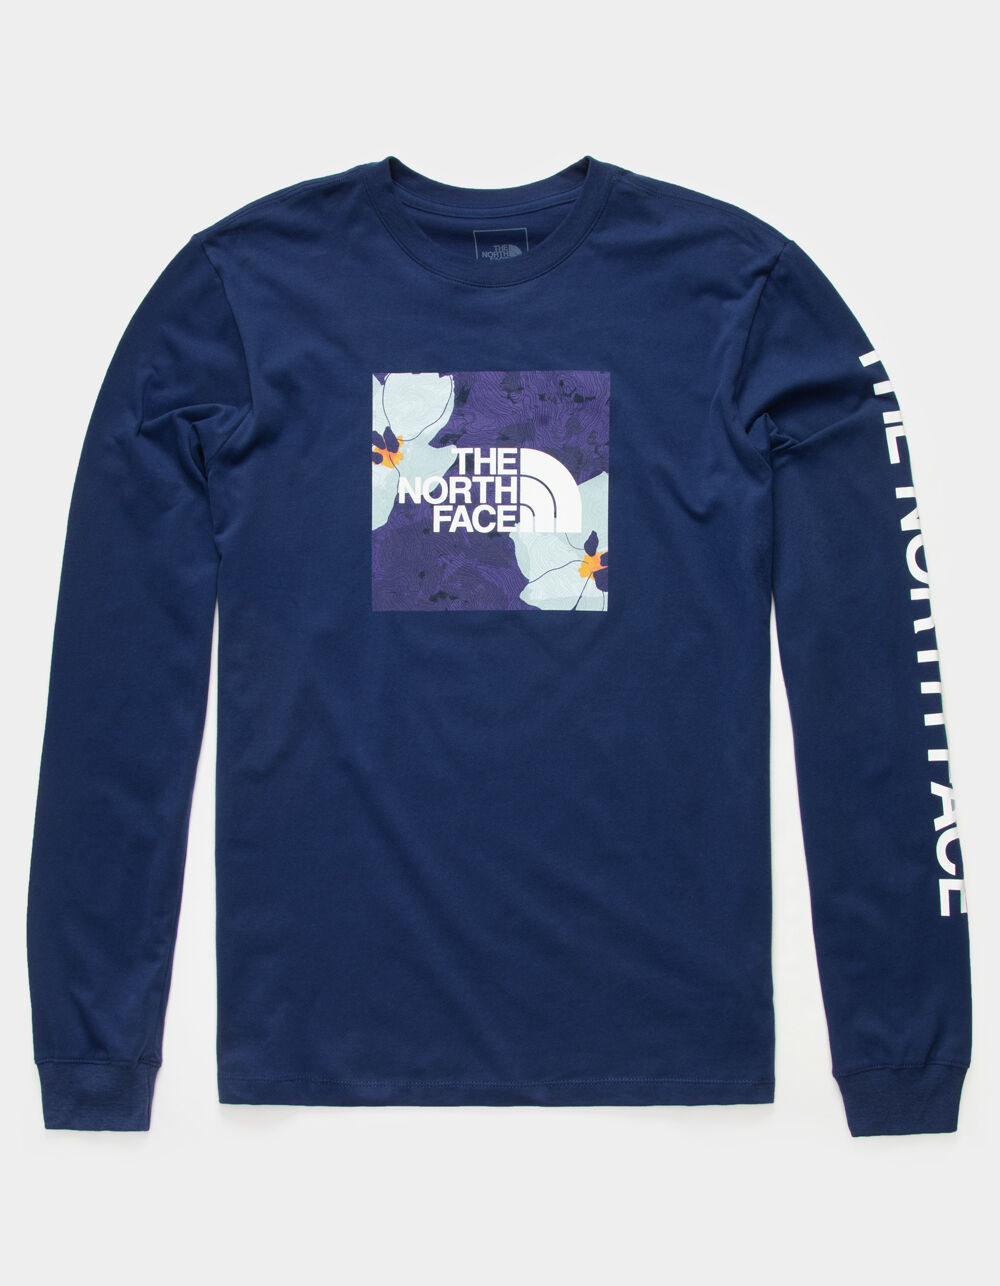 THE NORTH FACE Magnolia Red Box Mens T-Shirt - NAVY | Tillys